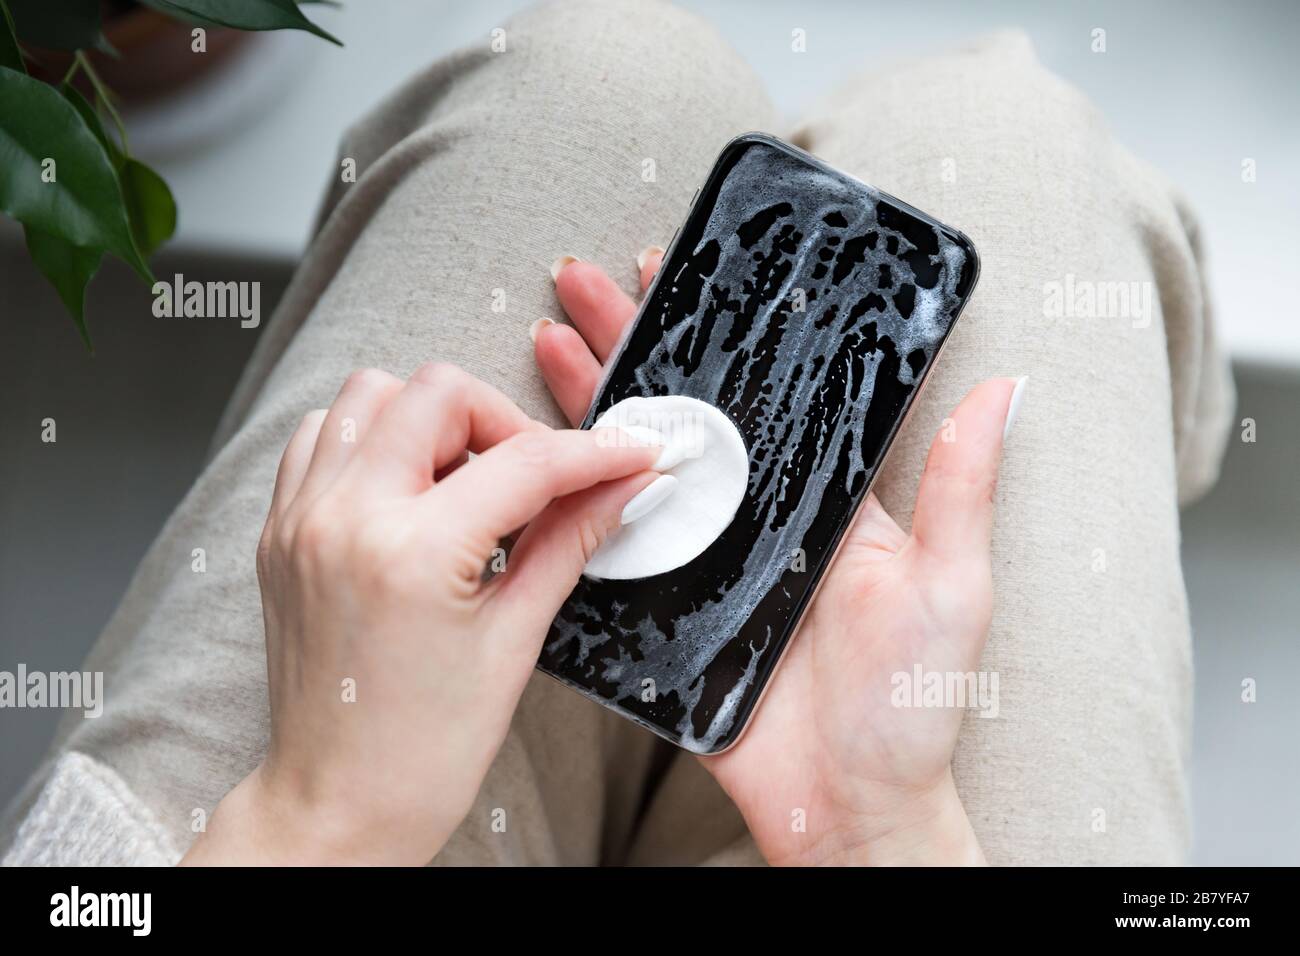 Woman cleaning mobile phone to eliminate germs, coronavirus, covid-19, bacterias. Female disinfects smartphone by applying sanitizer/alcohol disinfect Stock Photo